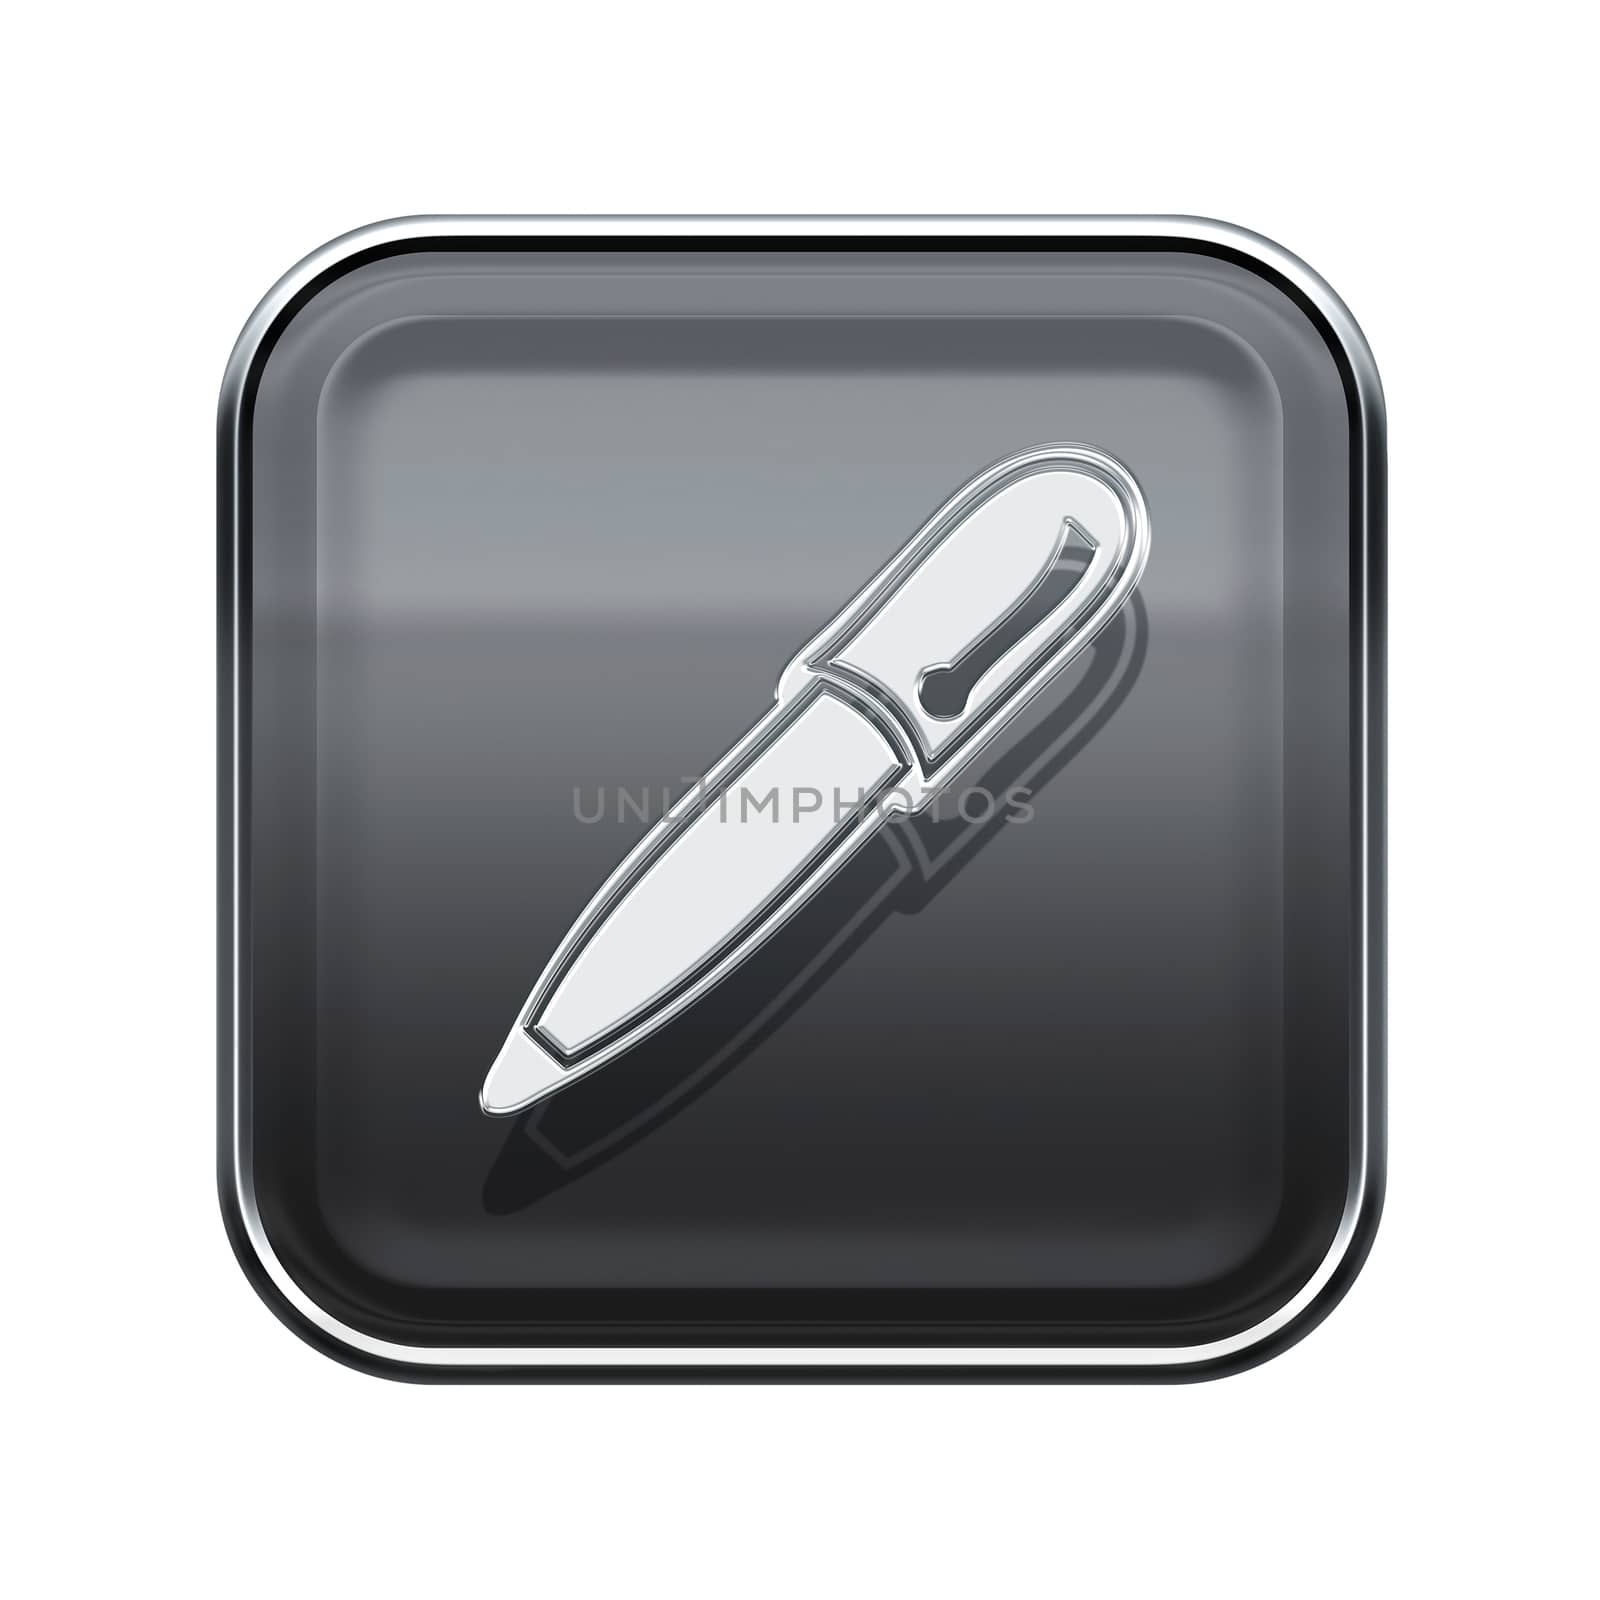 Pen icon glossy grey, isolated on white background by zeffss